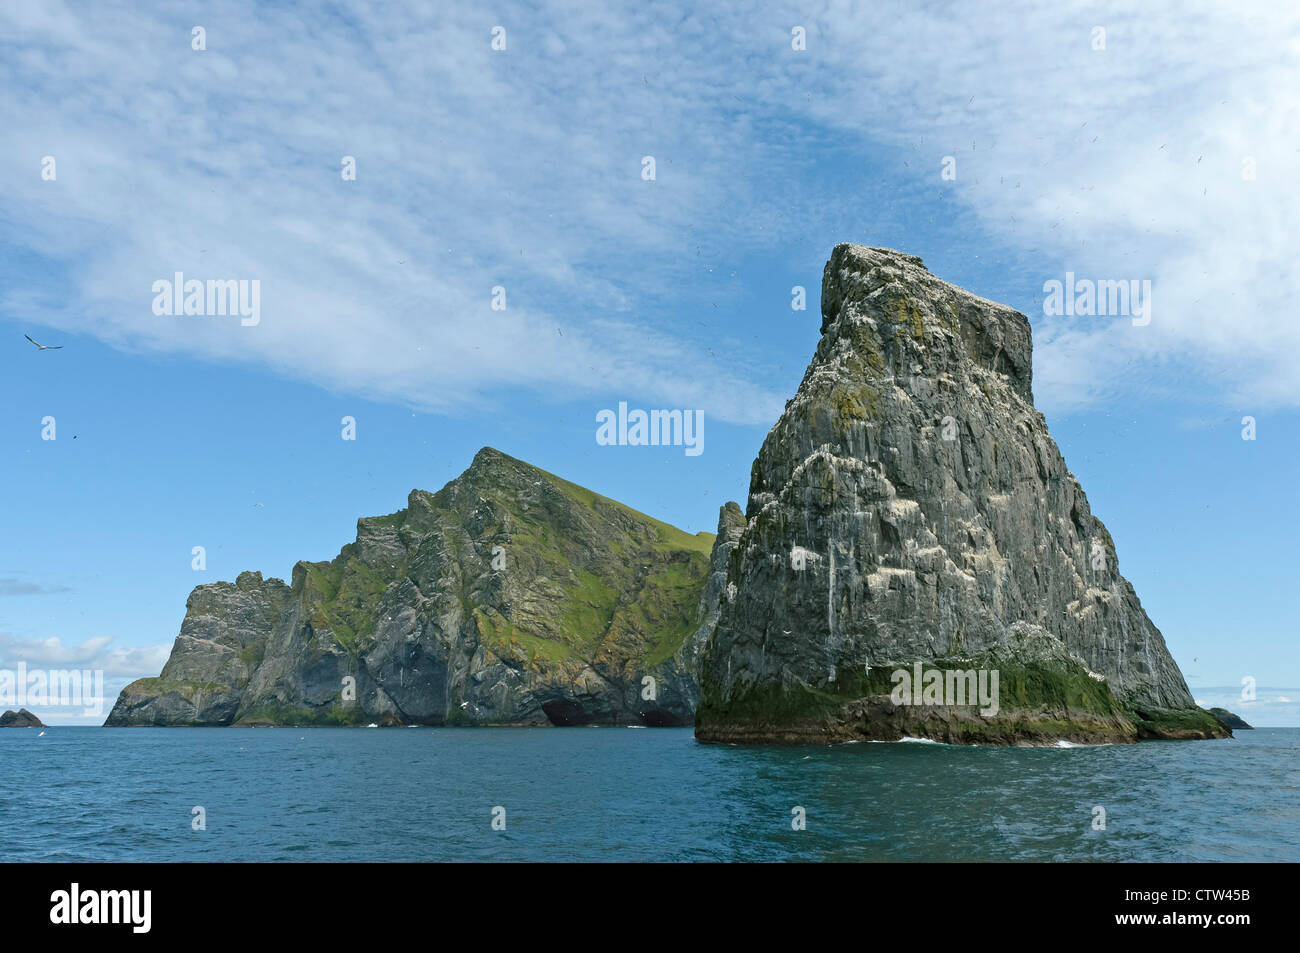 Stac Lee and the isle of Boreray in the Saint KIlda archipelago, with nesting colony of northern gannets (Morus bassanus). Stock Photo